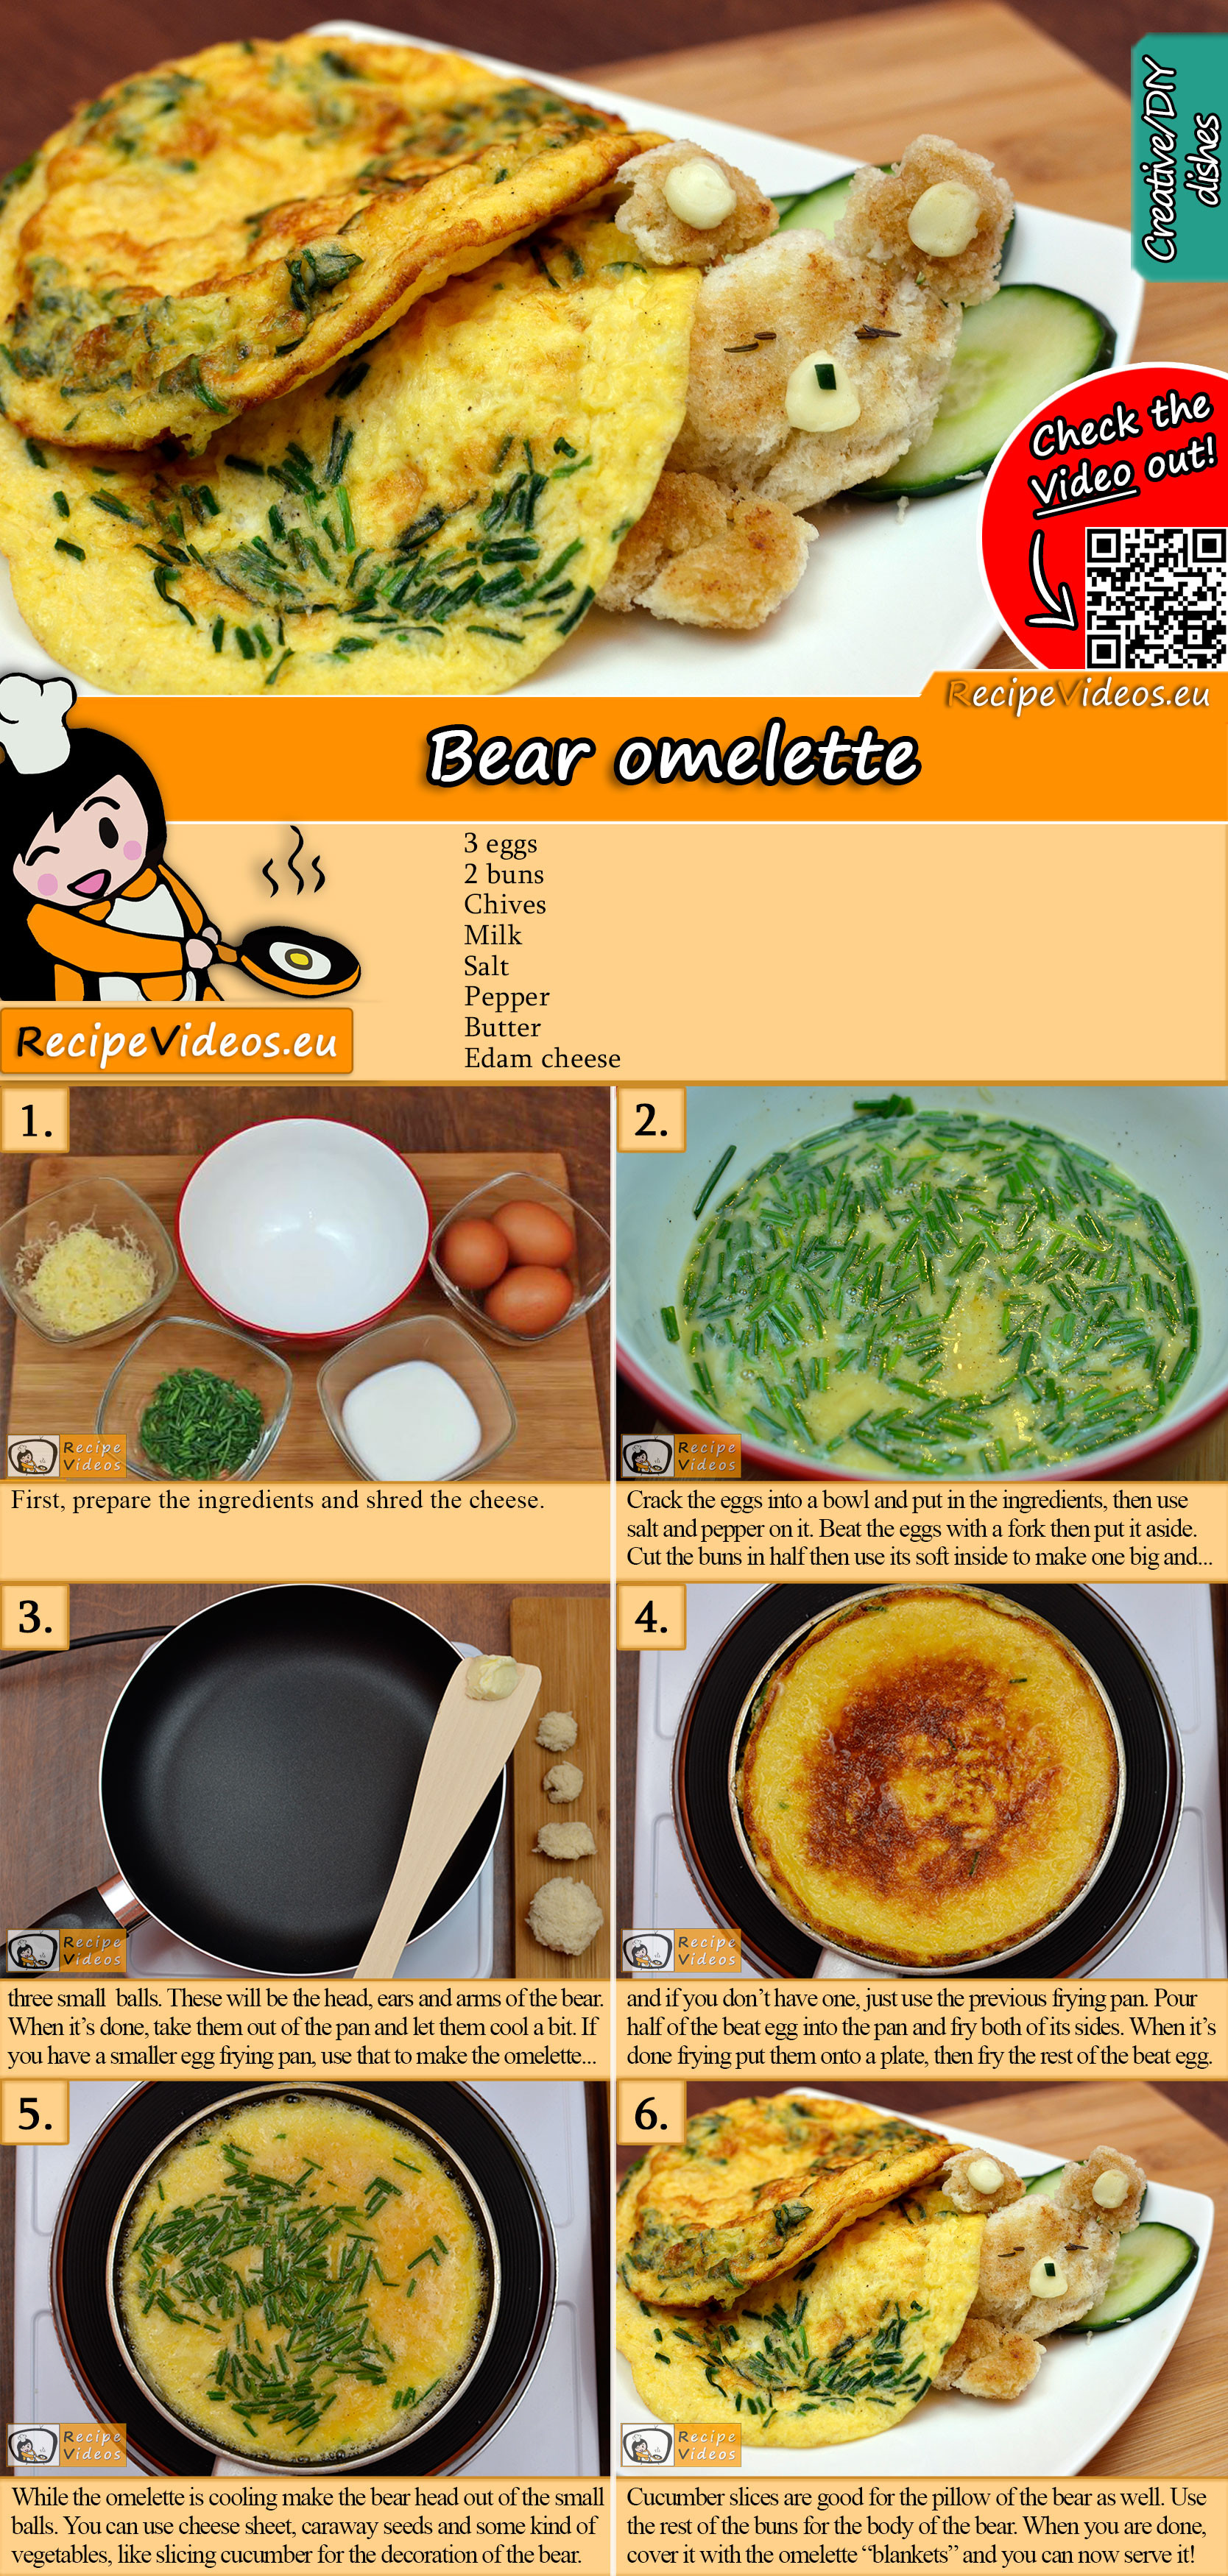 Bear omelette recipe with video